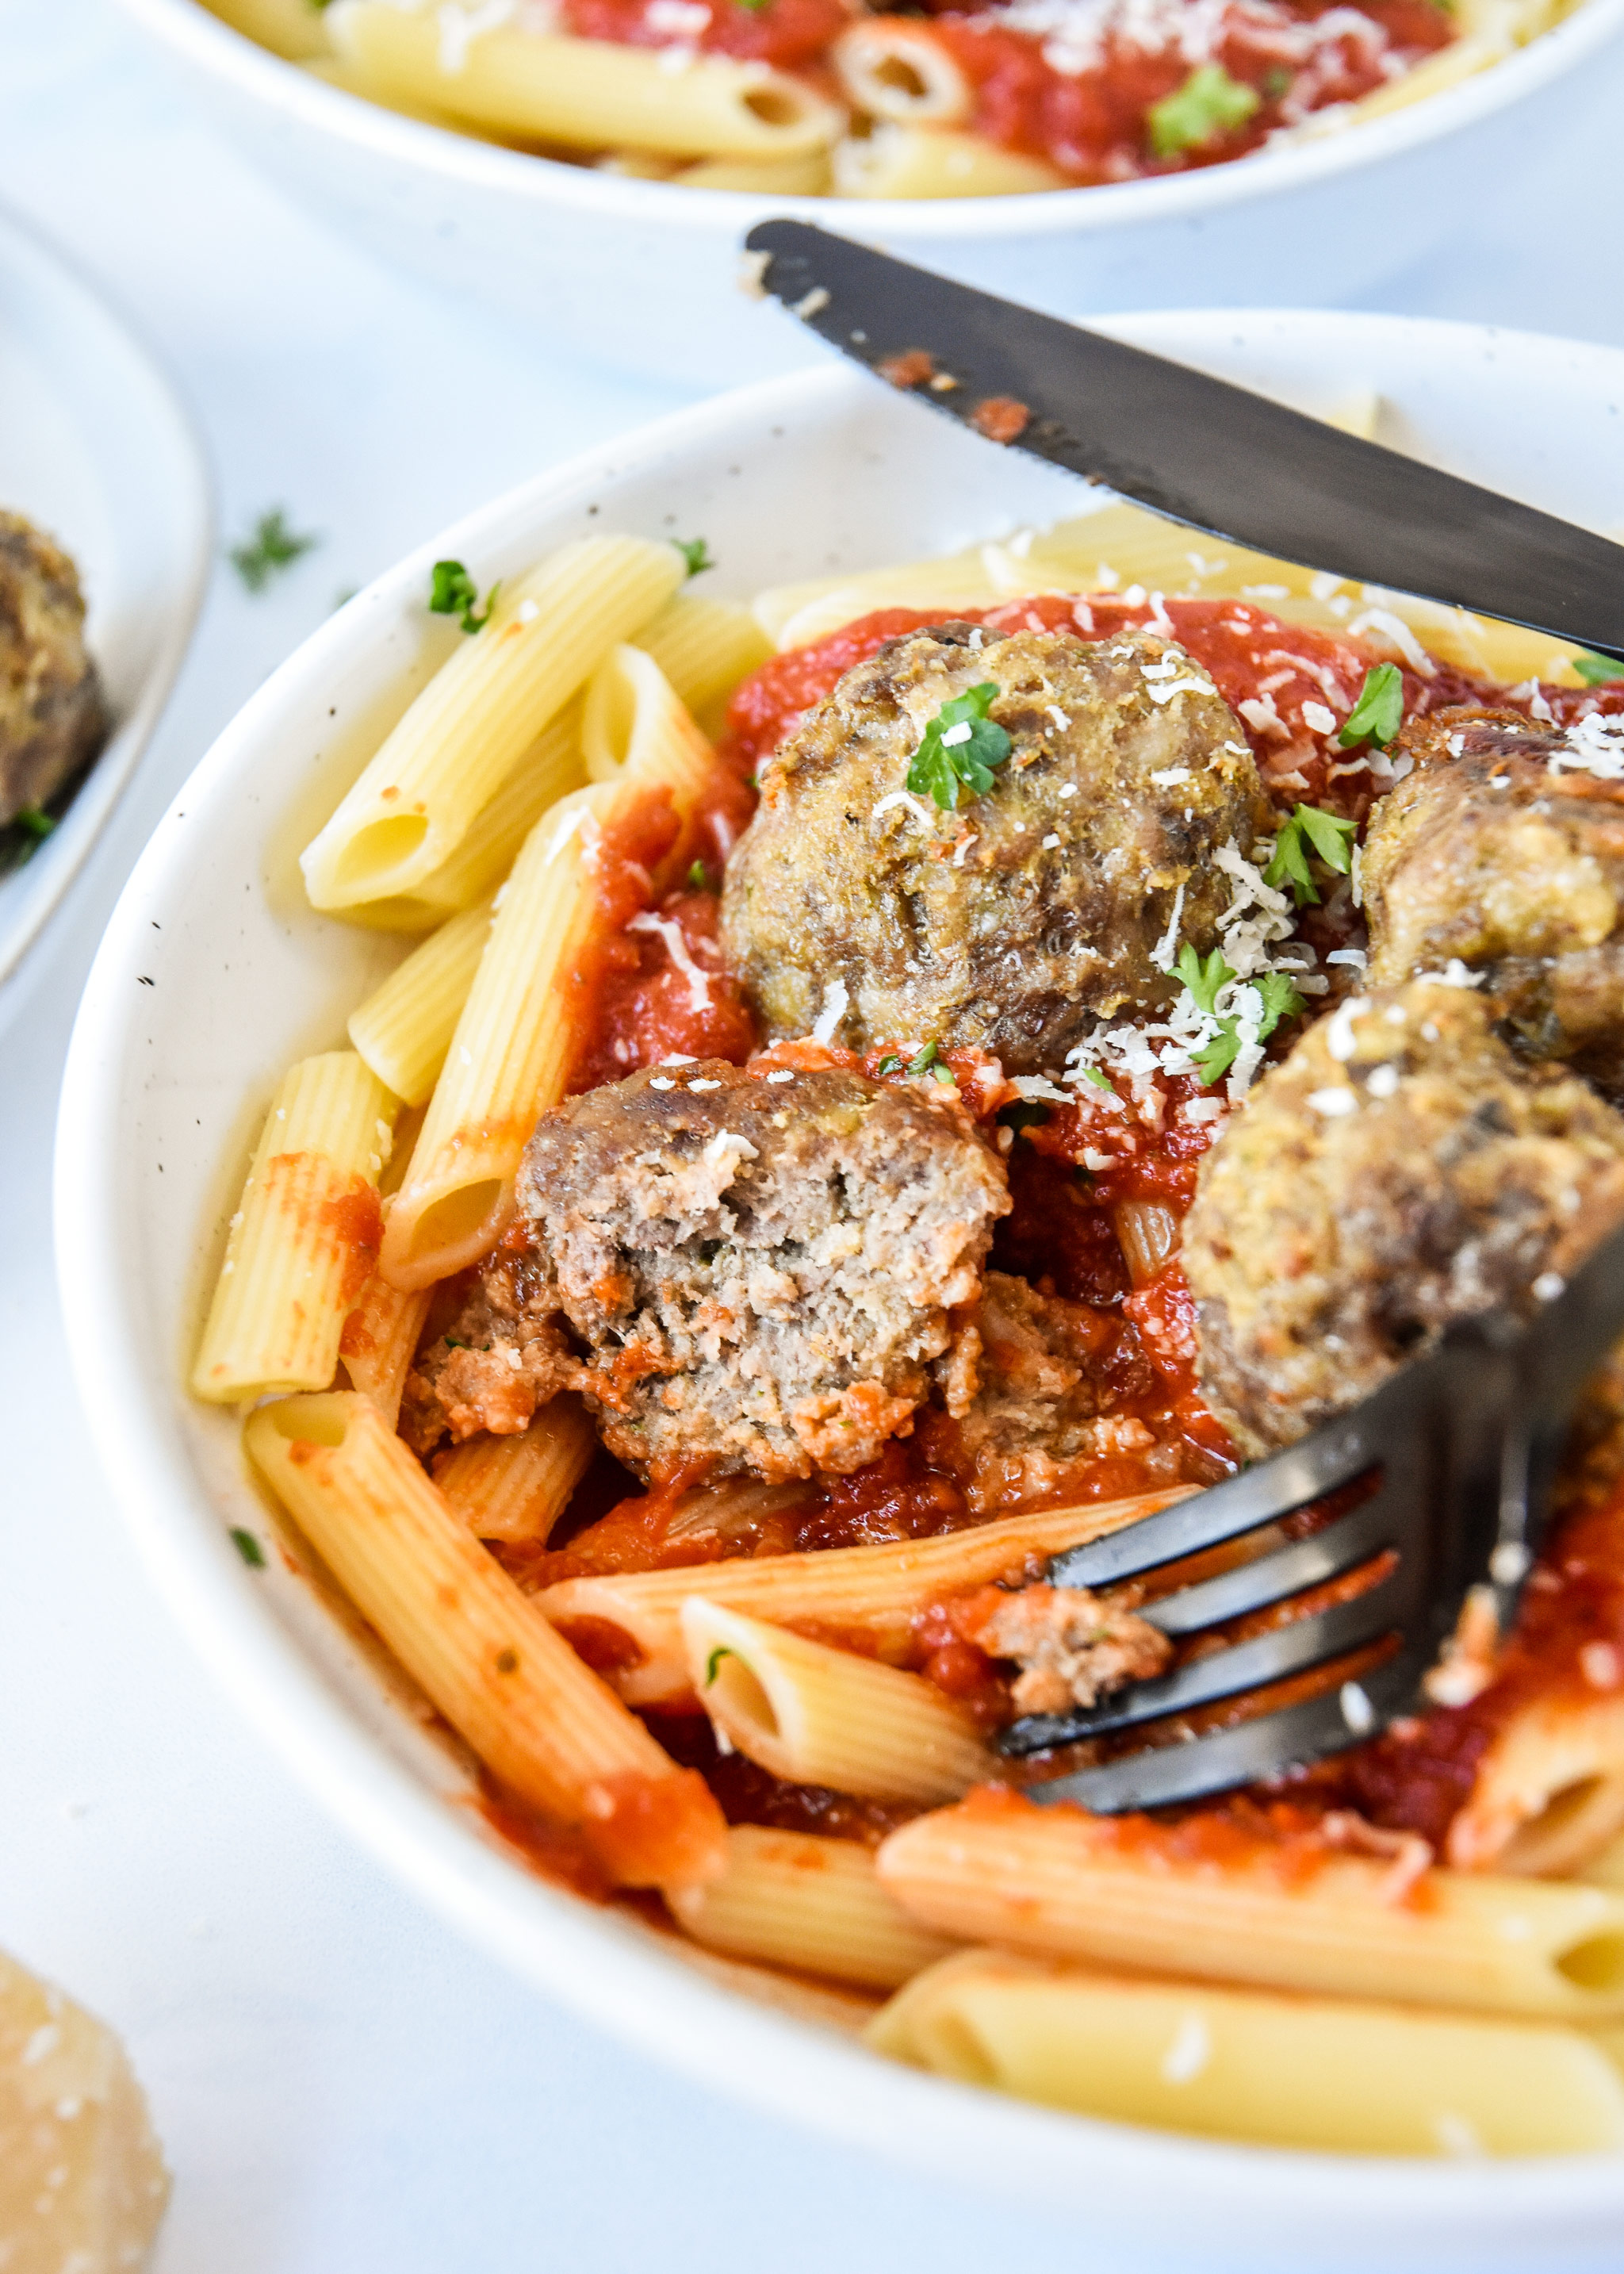 meatball cut in half with pasta and red sauce.